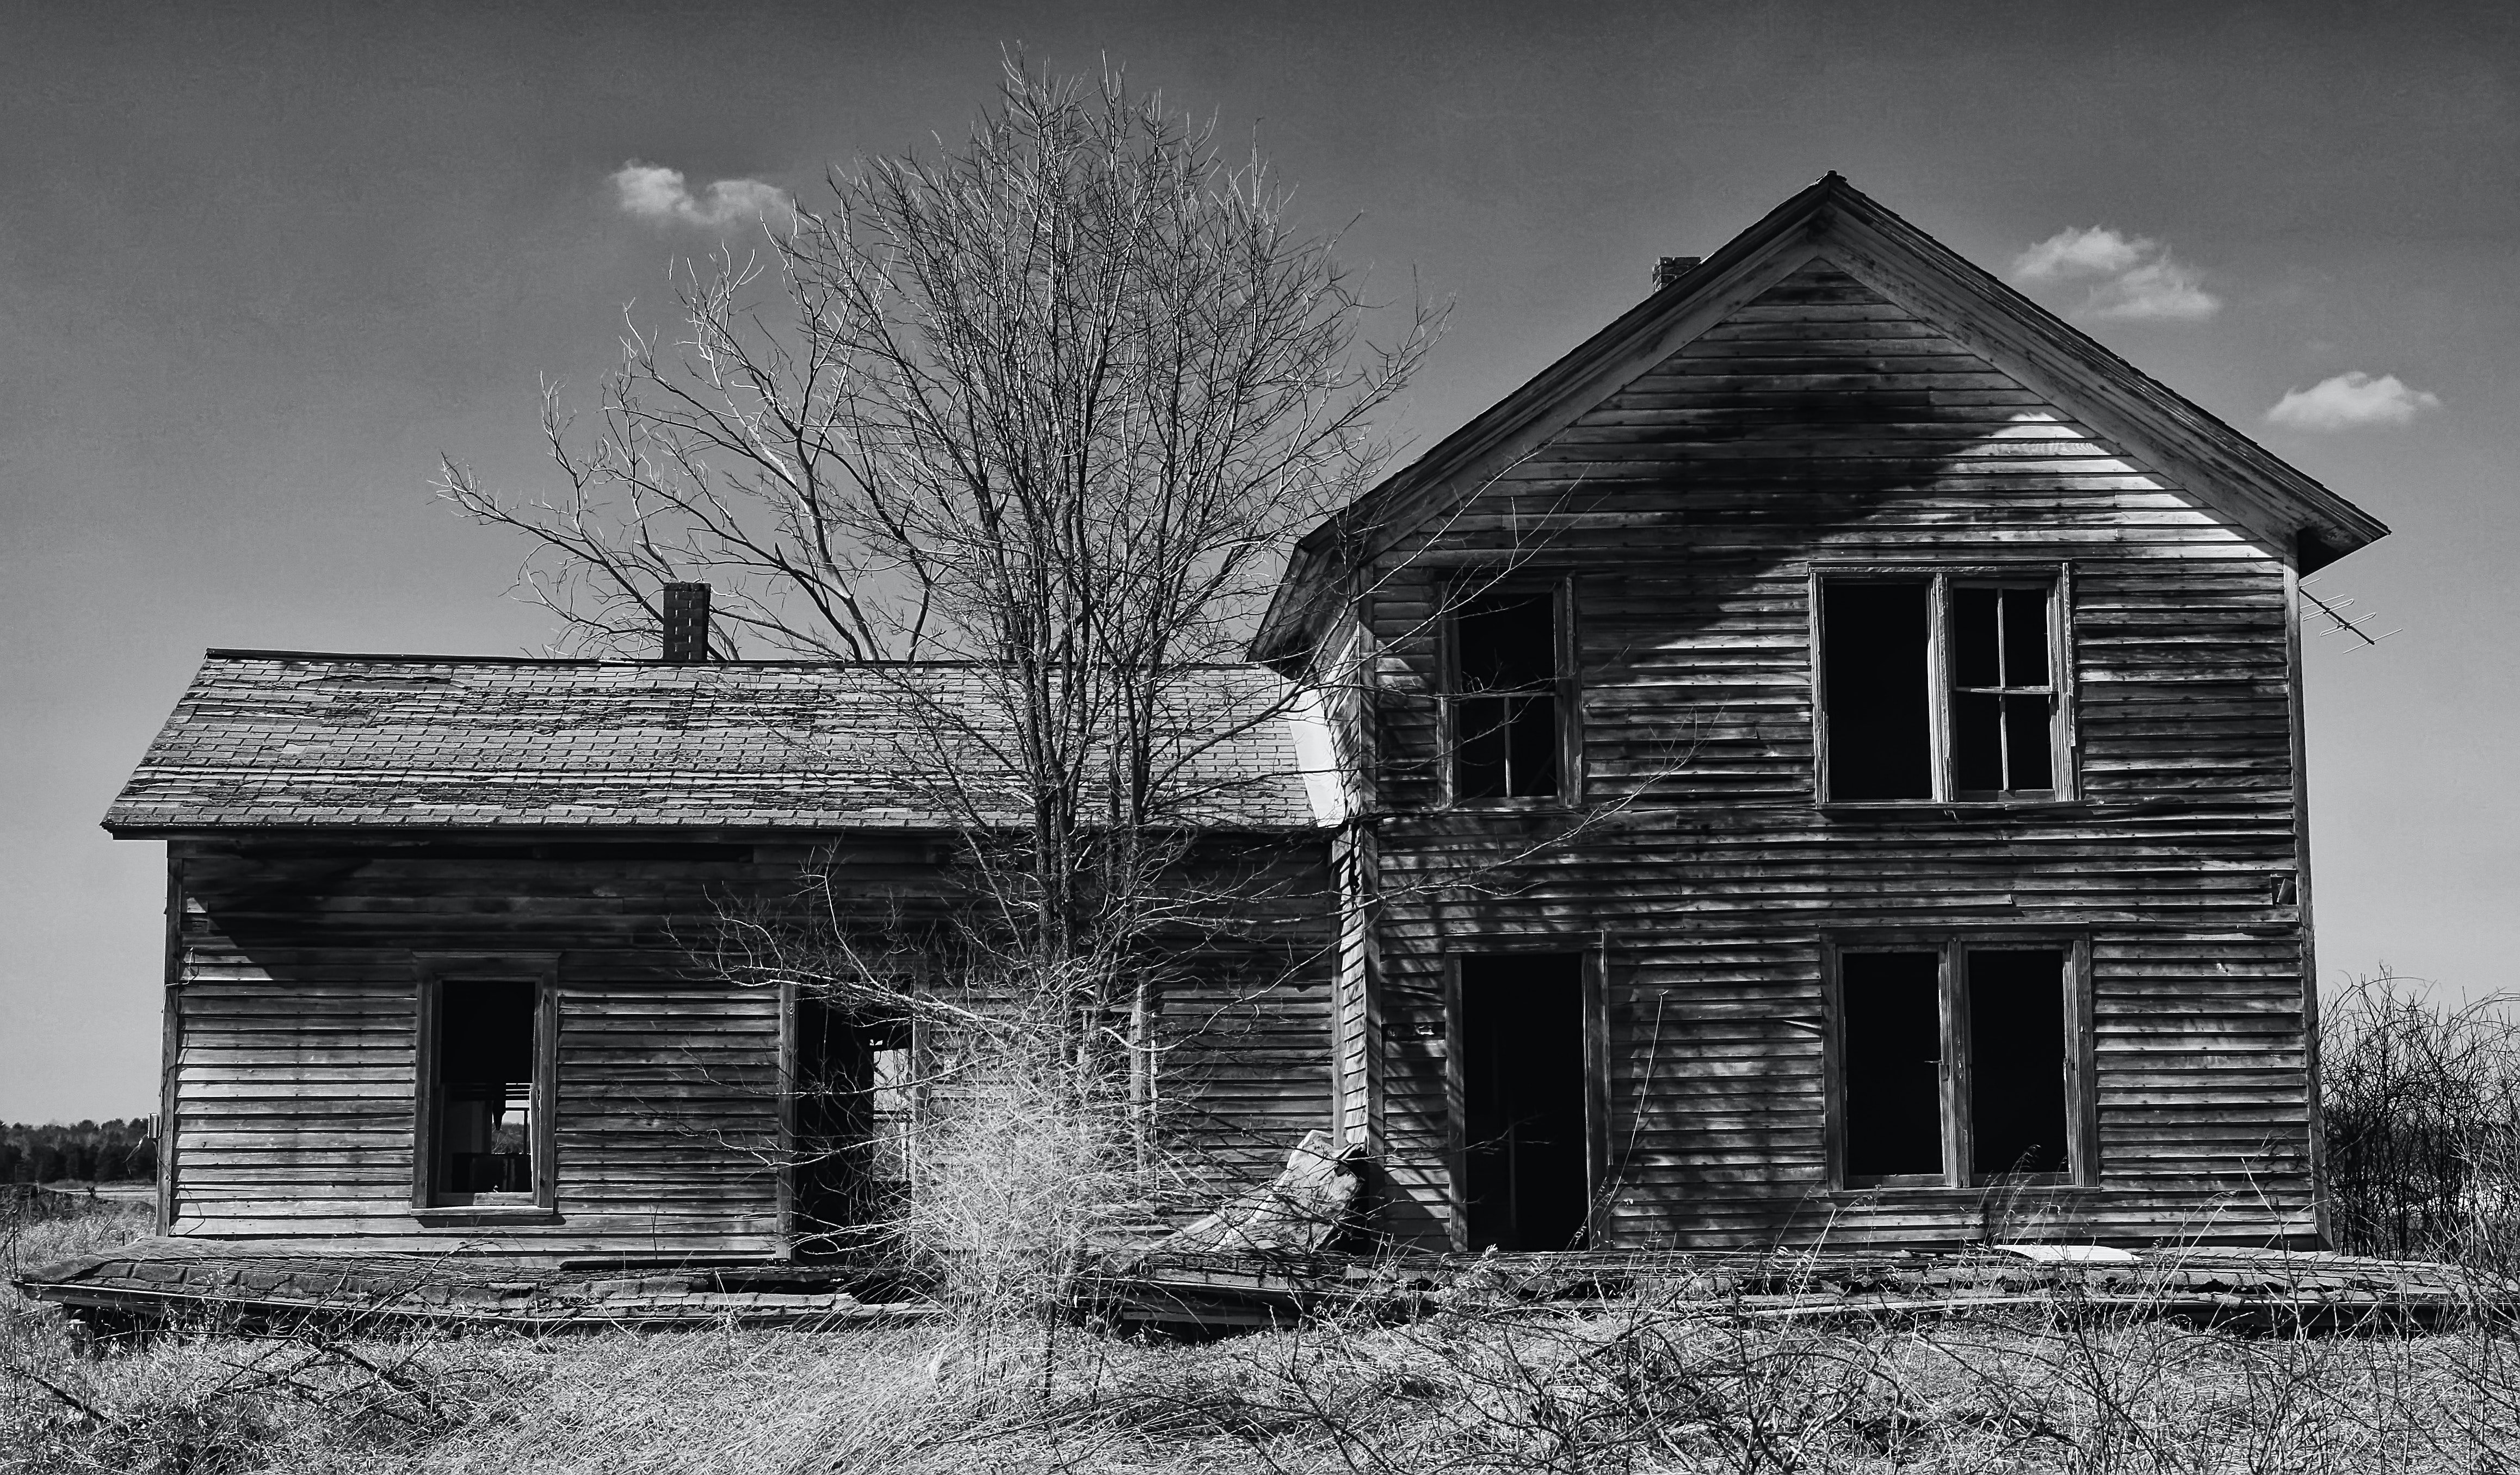 Sophia and her daughter lived in an abandoned old house. | Source: Pexels